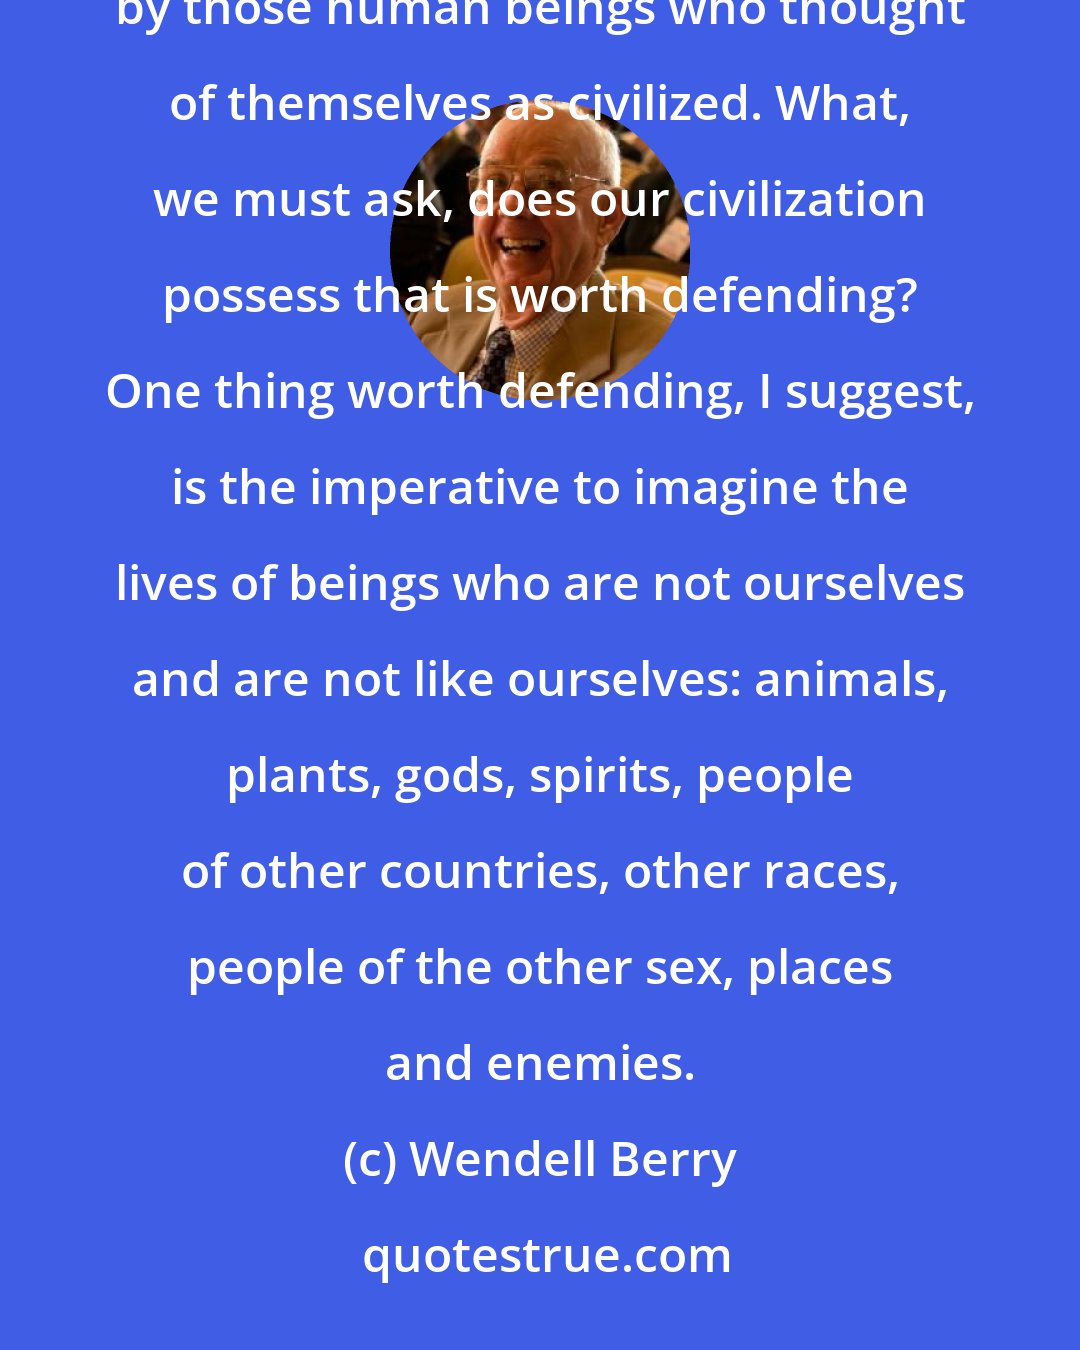 Wendell Berry: History leaves no doubt that among of the most regrettable crimes committed by human beings have been committed by those human beings who thought of themselves as civilized. What, we must ask, does our civilization possess that is worth defending? One thing worth defending, I suggest, is the imperative to imagine the lives of beings who are not ourselves and are not like ourselves: animals, plants, gods, spirits, people of other countries, other races, people of the other sex, places and enemies.